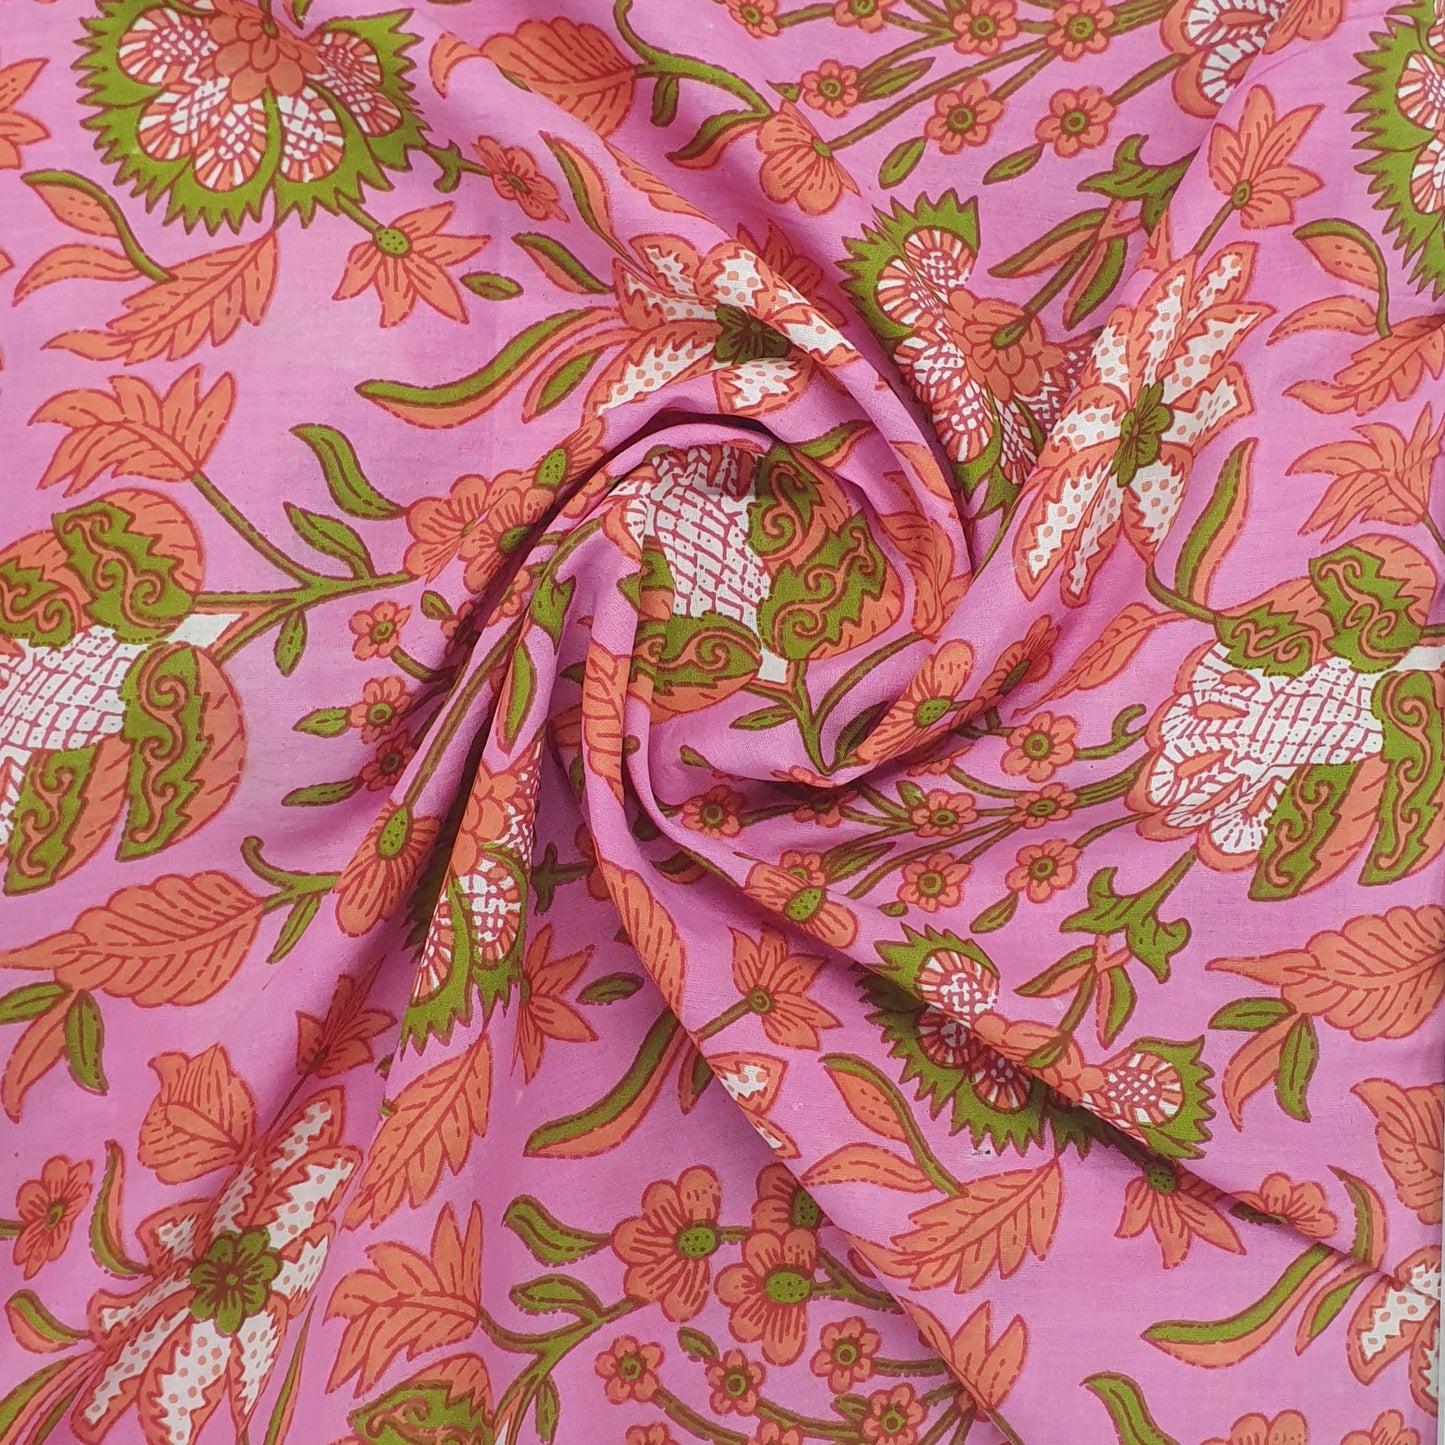 Pink & Red Floral Print Cotton Fabric Trade UNO